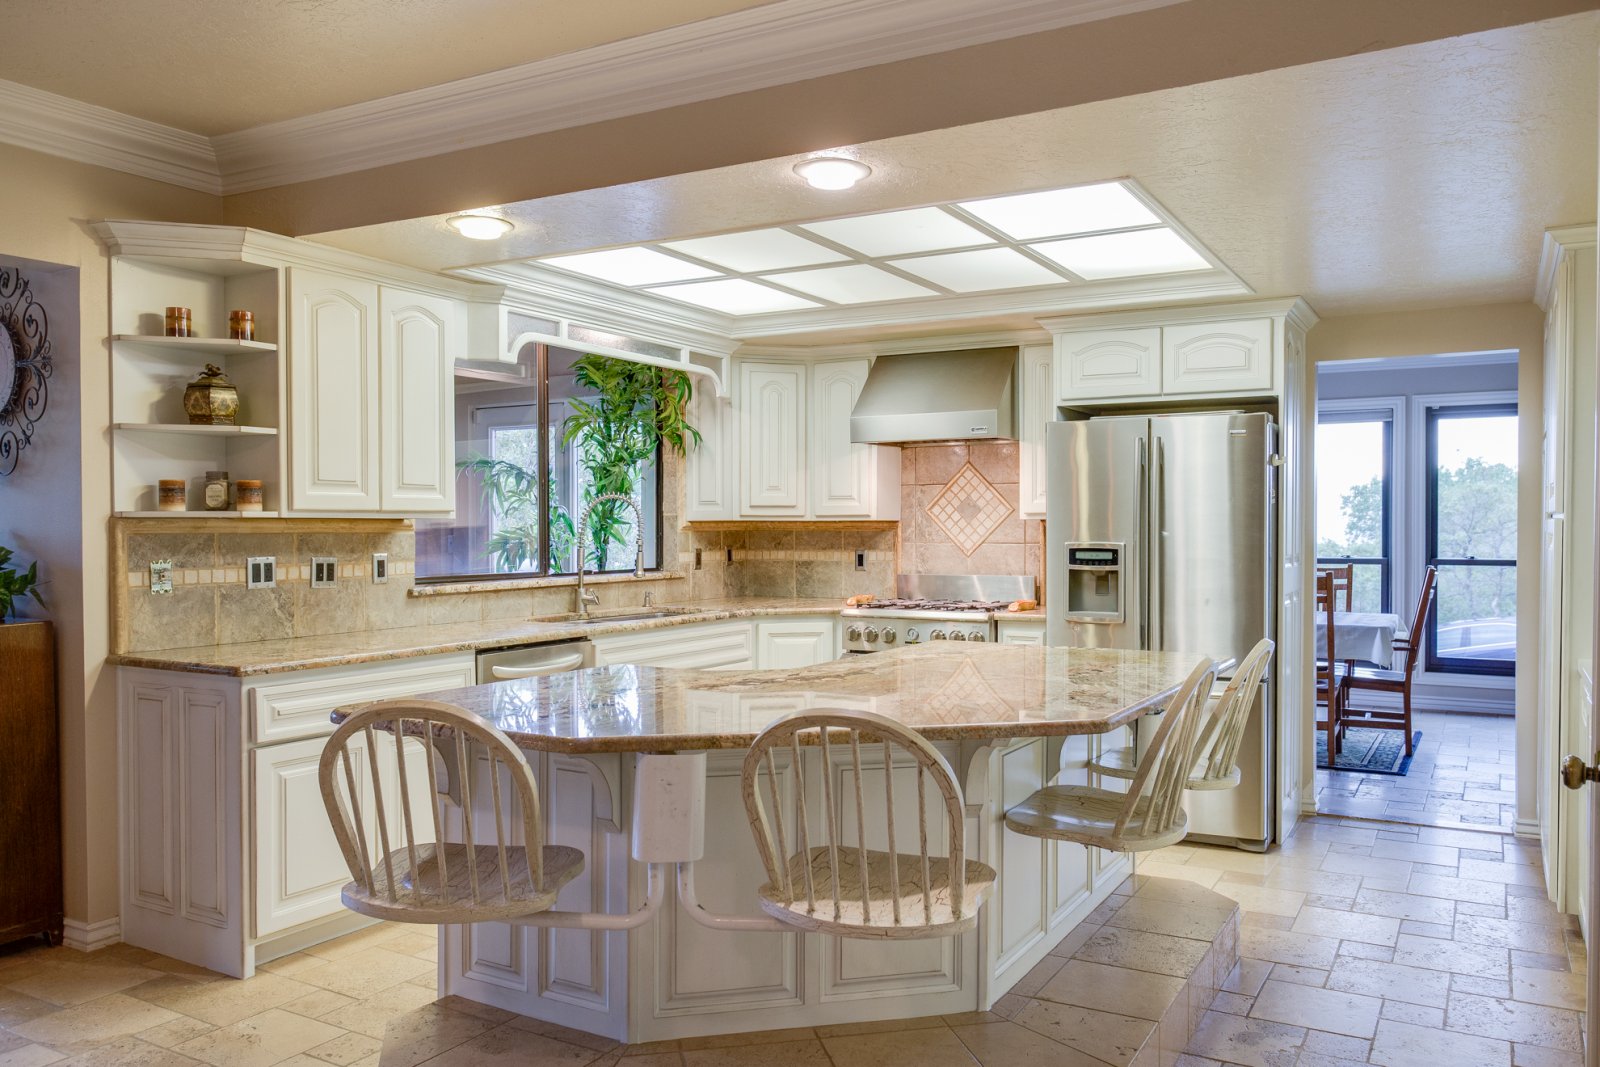 Kitchen in the Ogden Utah Seller Financing Homes. Call or go to our website for more info.